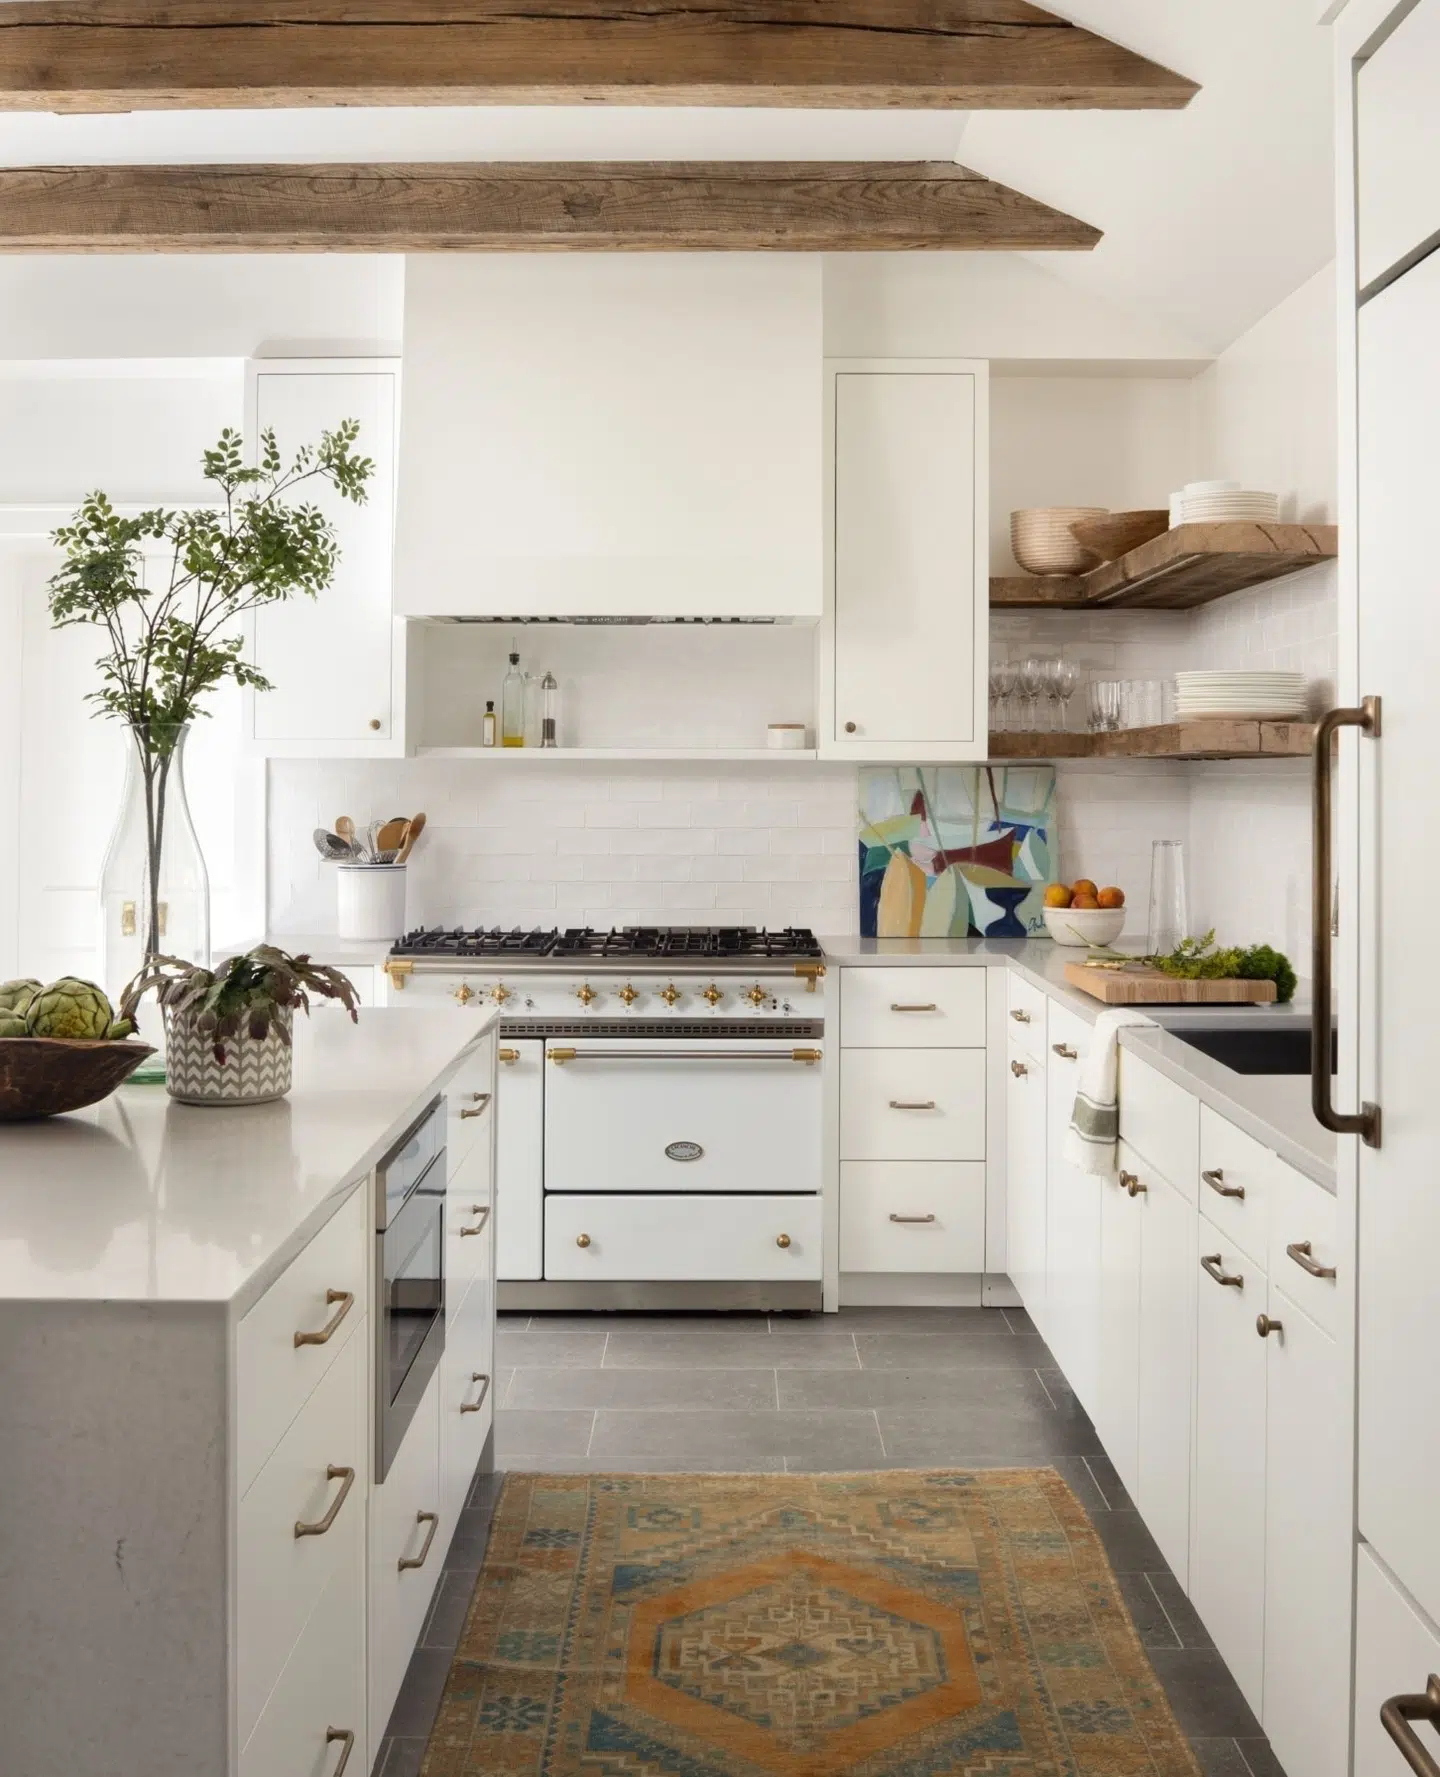 From light and bright to moody blues, we couldn't possibly pick a favorite @zoefeldmandesign kitchen. Take a peek at our top 10!⁠
⁠
Photography:  @stacyzaringoldberg⁠
⁠
#kitchen #designchic #housebeautiful #beams⁠
#kitchendesign #kitchendecor #kitcheninspiration #kitchengoals #kitcheninspo #kitchenideas #kitchens #kitchenstyle #dreamkitchen #kitchensofinstagram #kitchenlife #kitchenrenovation #whitekitchen #classickitchen #kitchenmakeover #woodbeams⁠
#exposedbeams